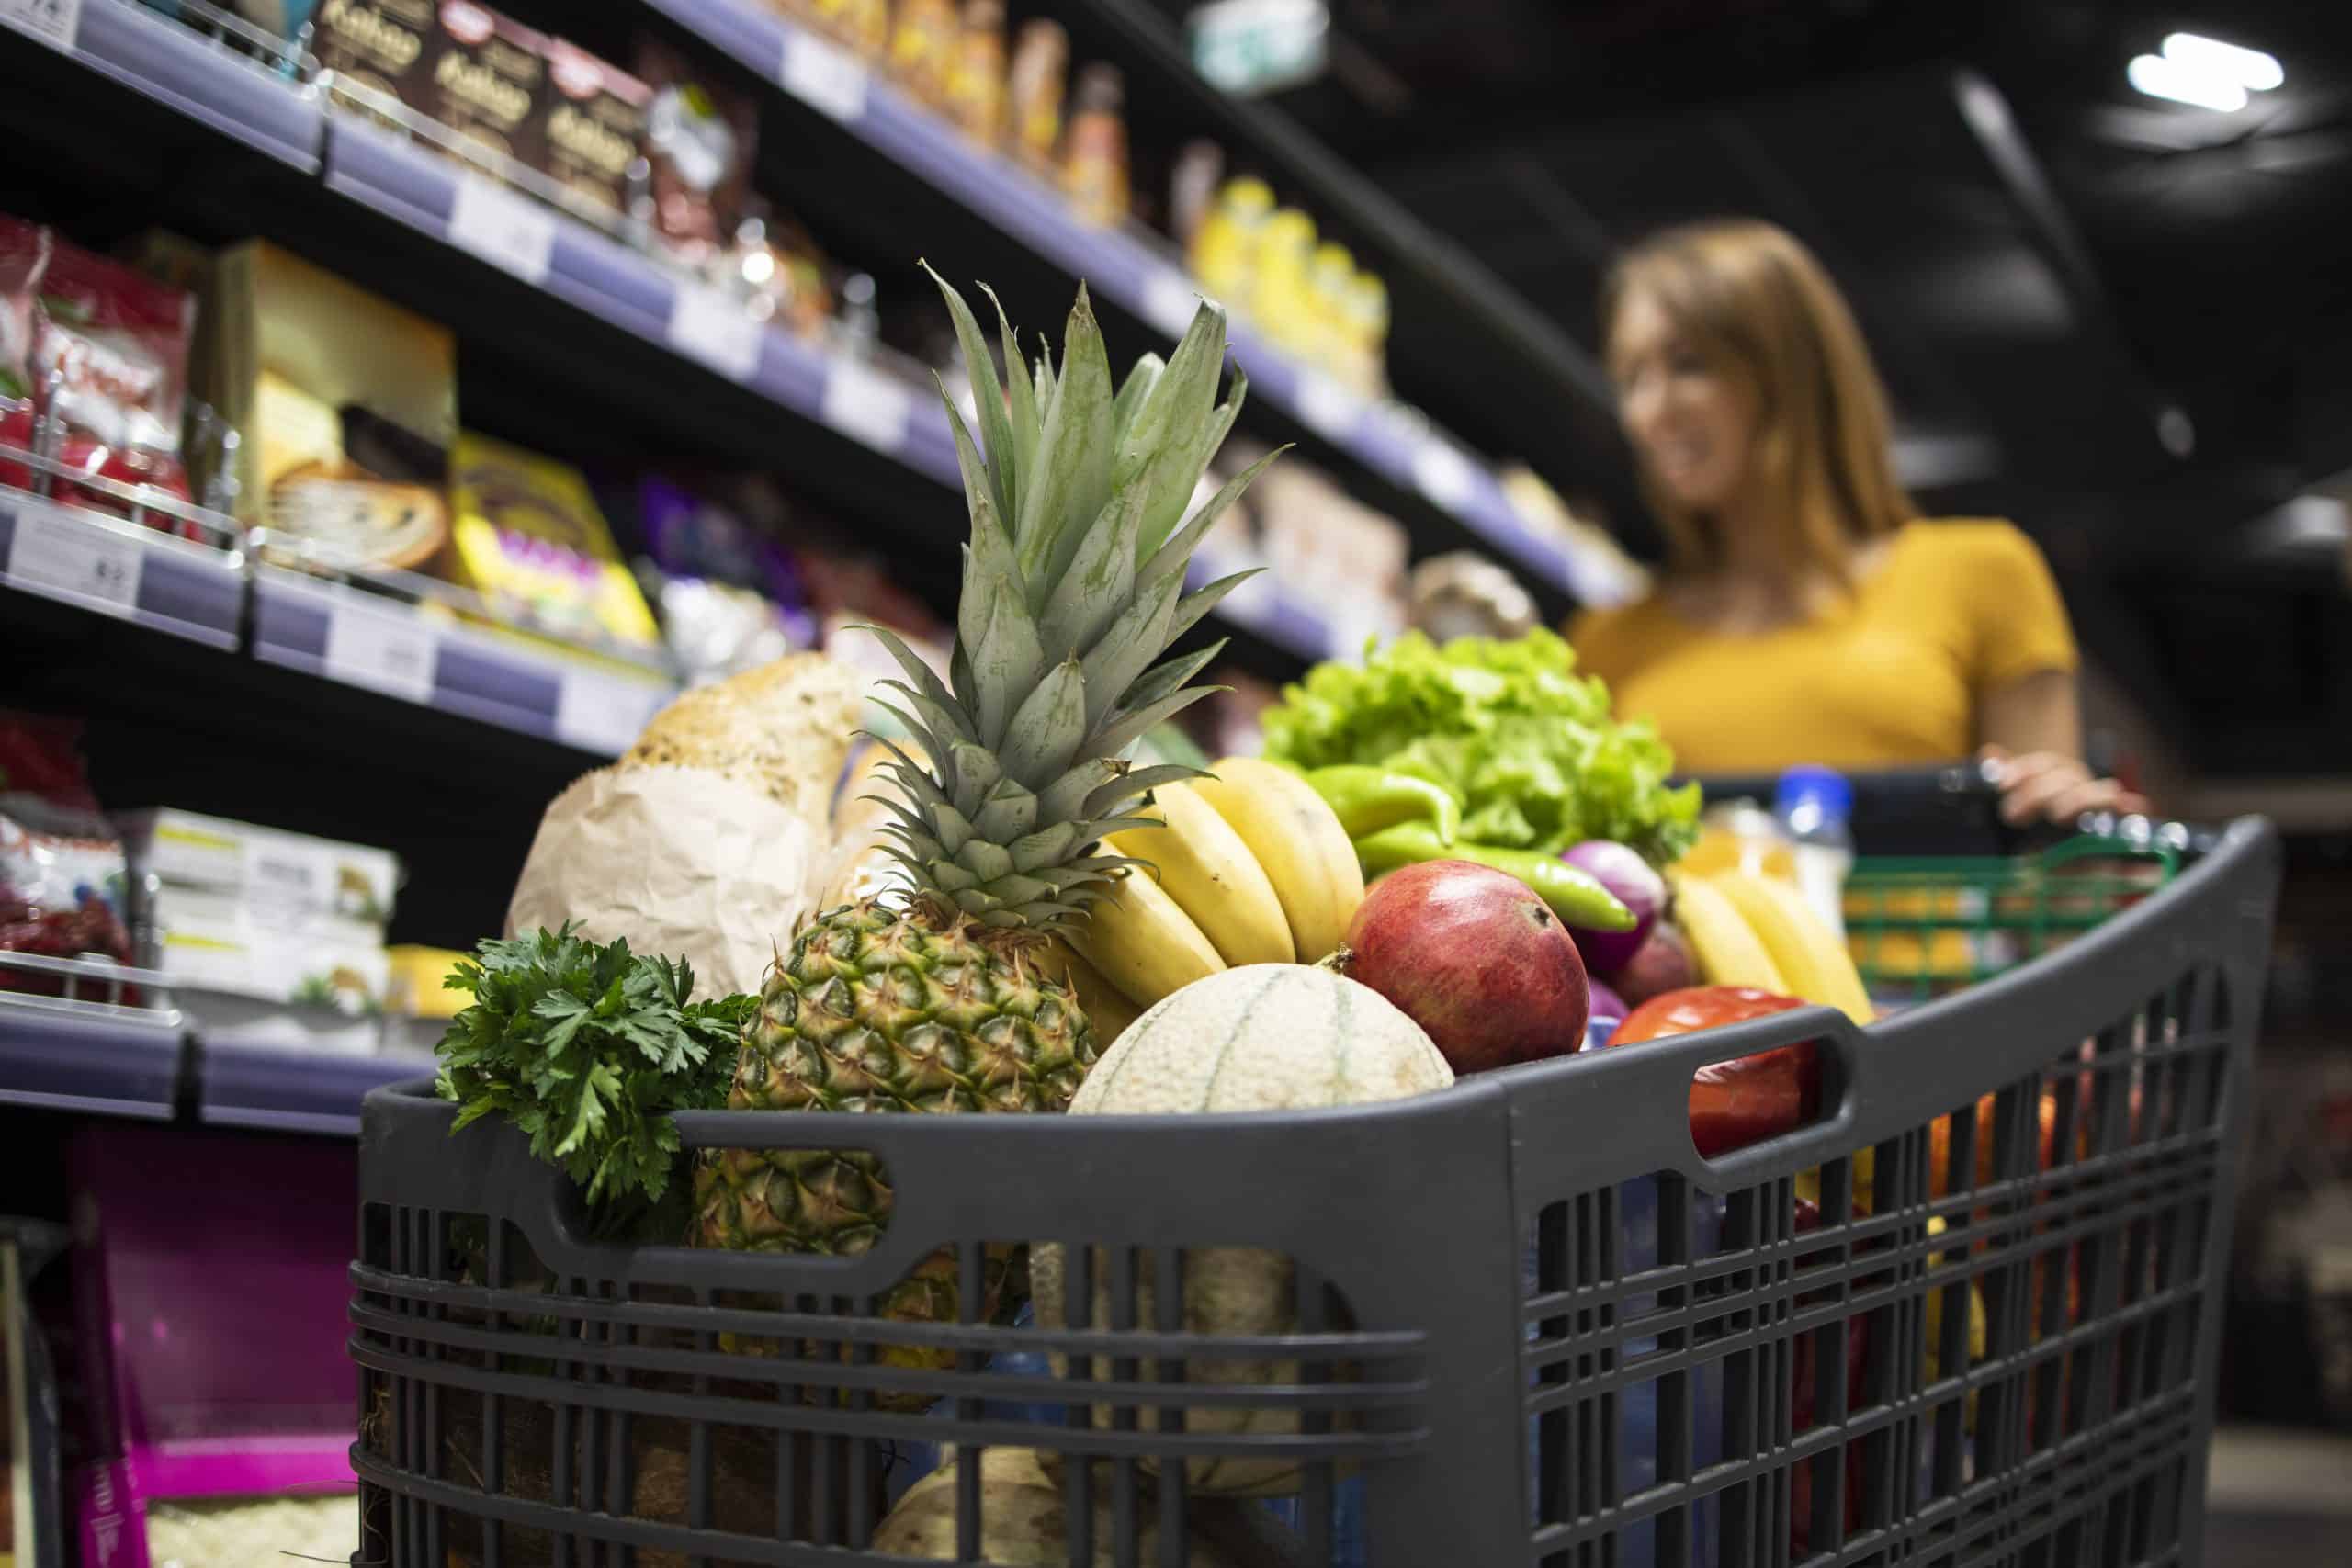 Close up view of shopping cart overloaded with food while in background female person choosing products.